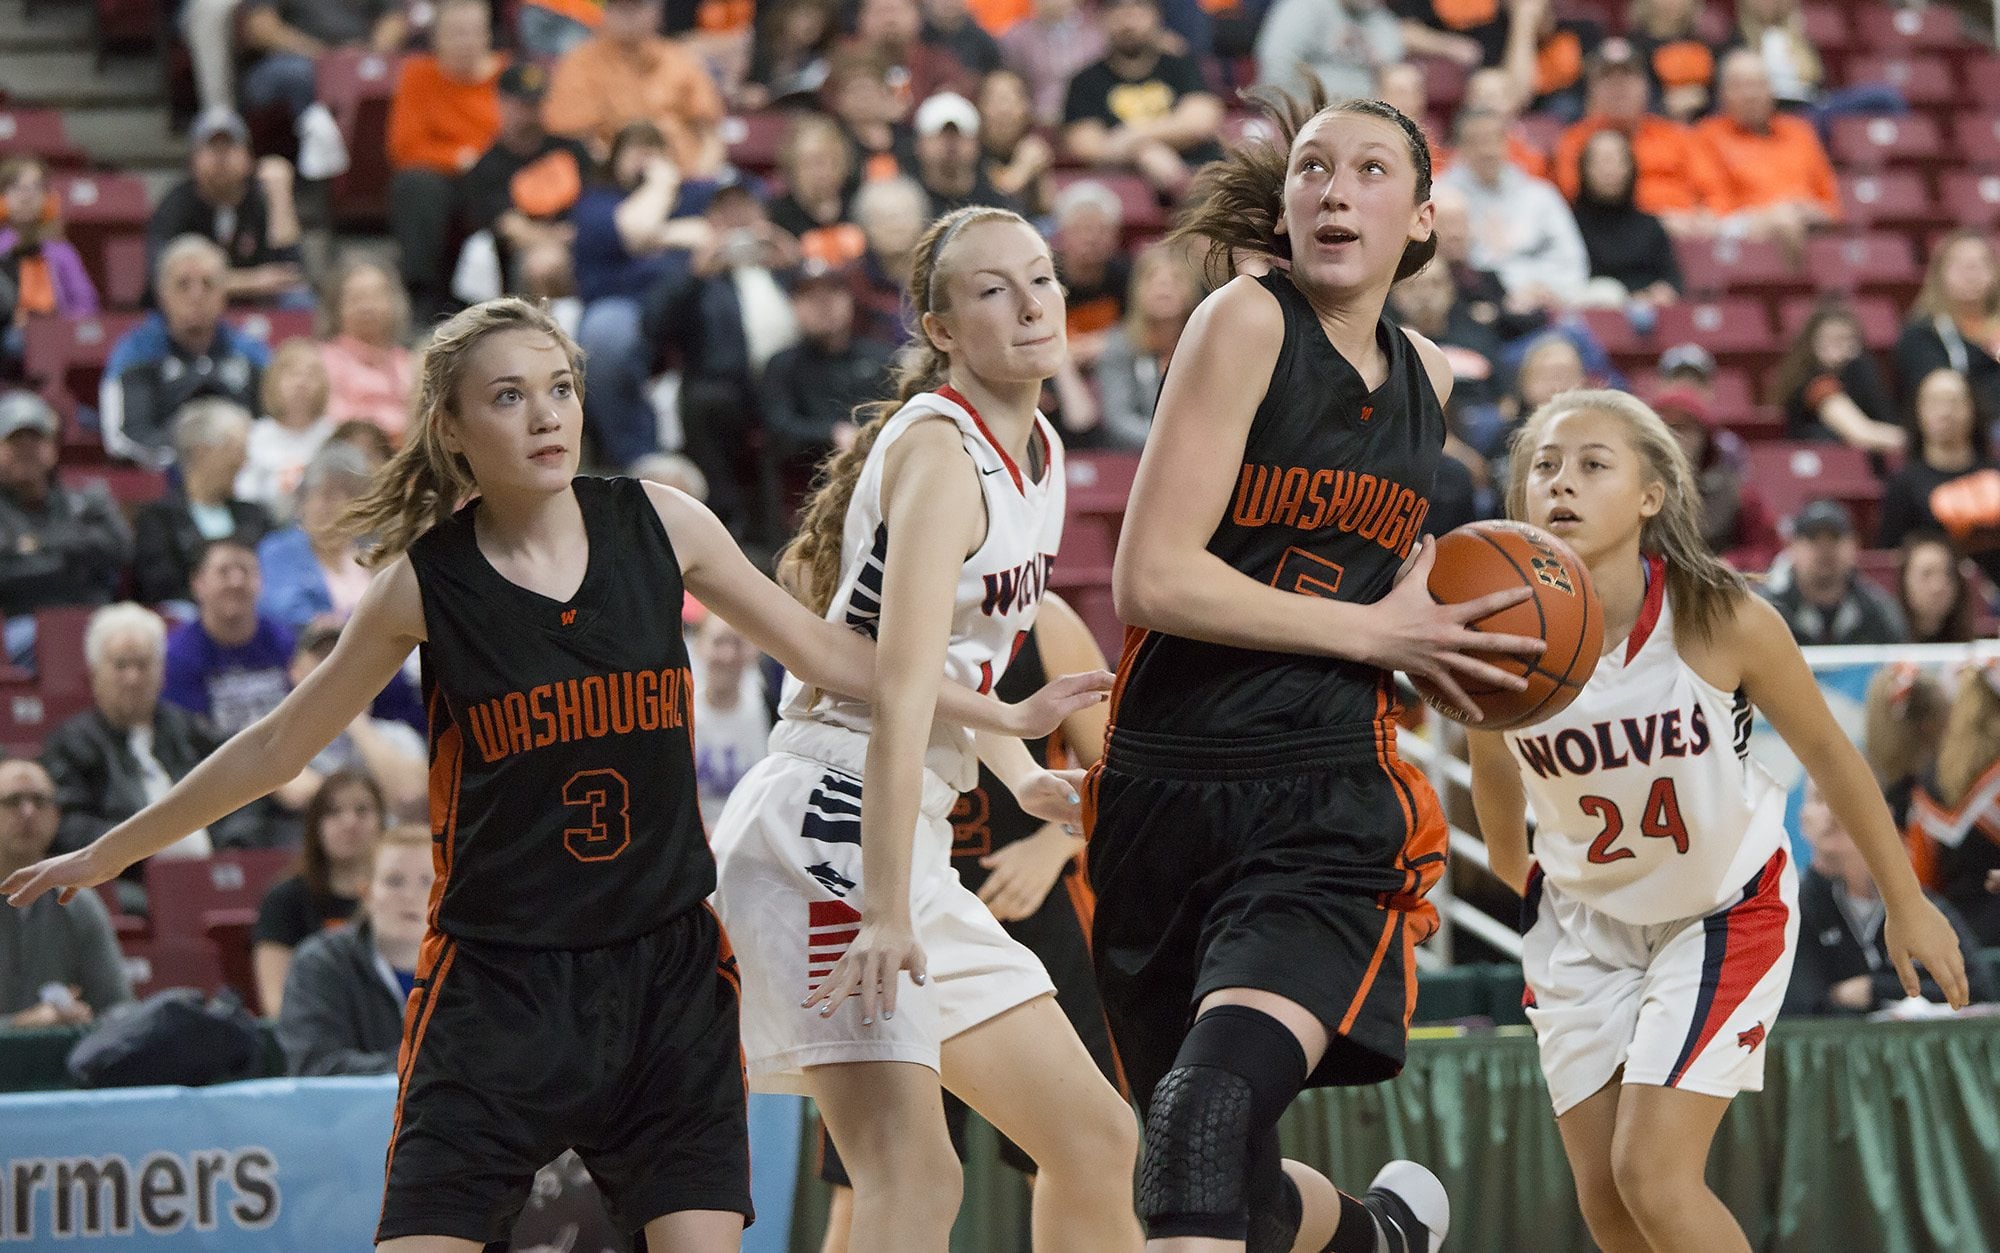 Washougal High School’s Beyonce Bea drives to the basket in the second half of Washougal’s game  against Black Hills High School in the class 2A girls state basketball tournament March 5, 2016 in the Yakima SunDome in Yakima, Wash.